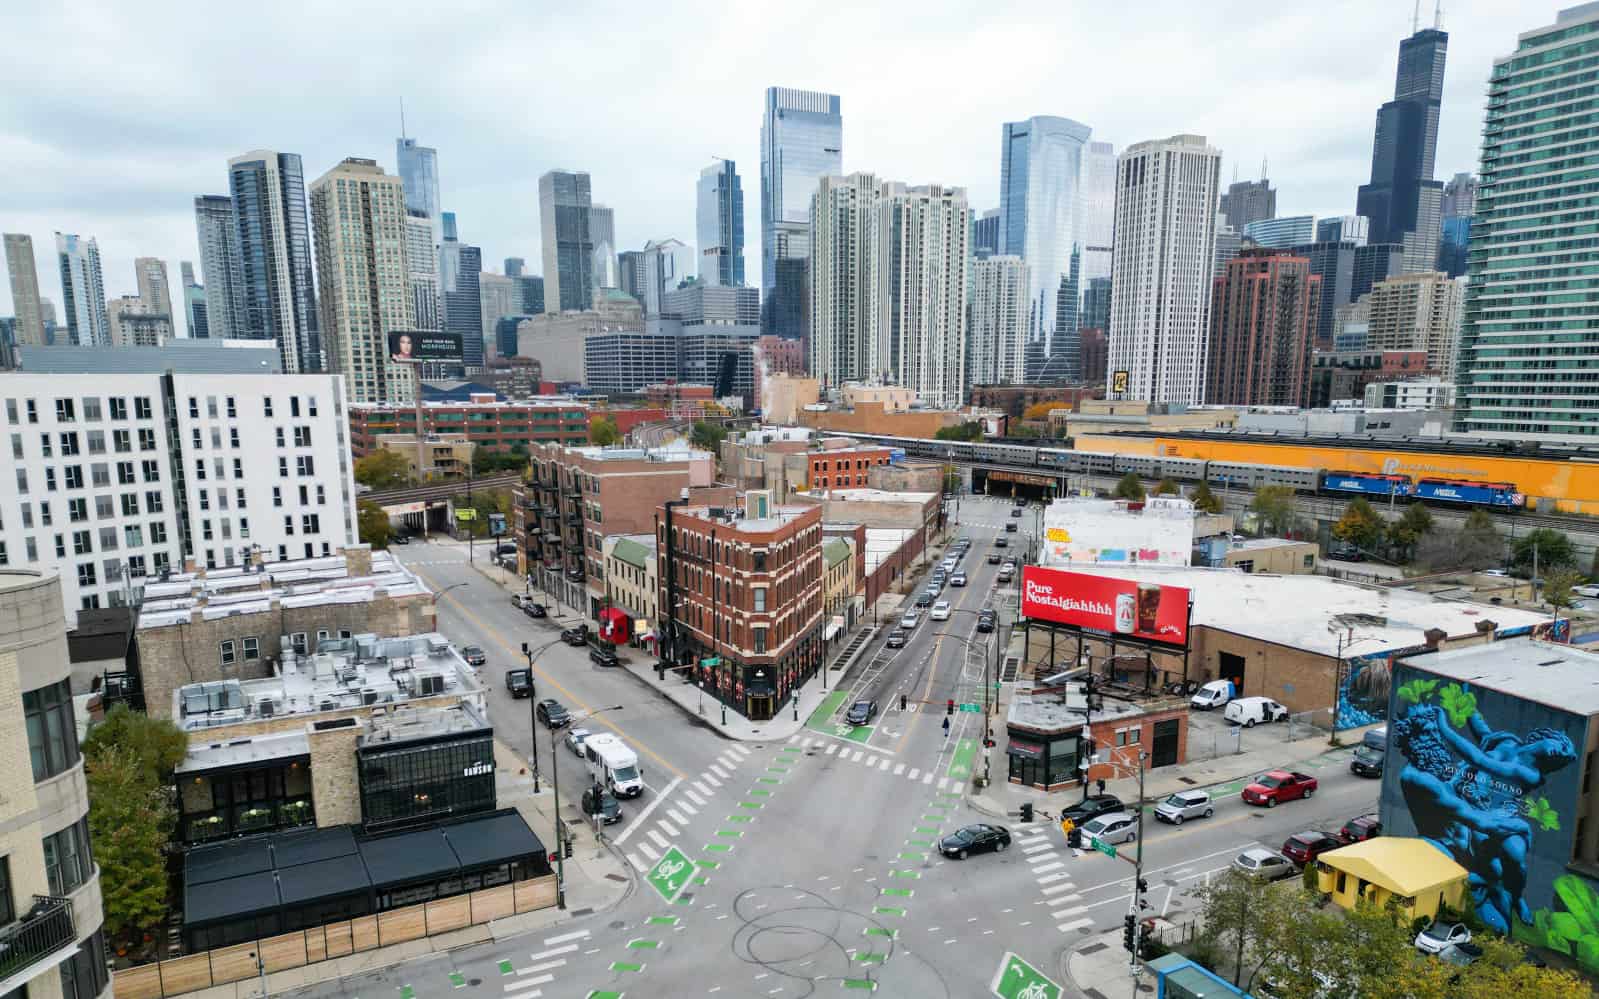 Overhead view of Grand/Halsted/Milwaukee Ave intersection in Chicago's River West, with city skyline in the background